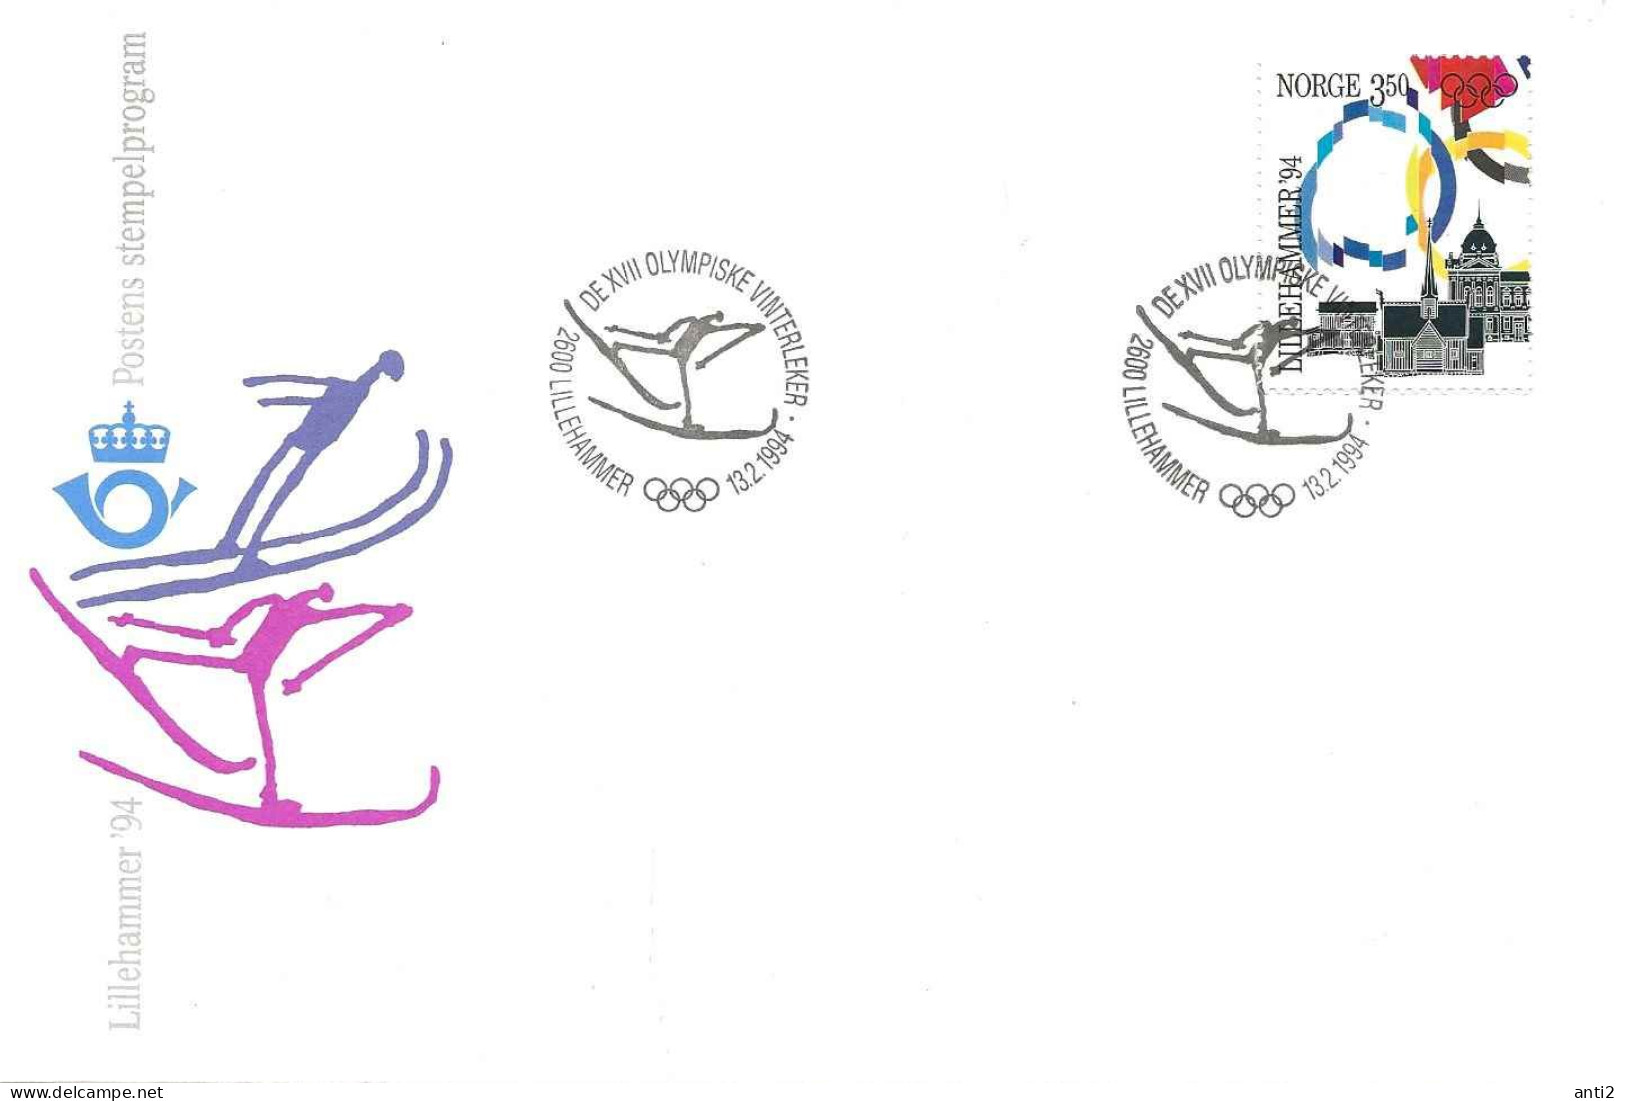 Norway Norge 1994 Winter Olympics, Lillehammer - Flags Mi 1148  Skiing Cross Country Cancelled Lillehammer 13.2.94 - Covers & Documents